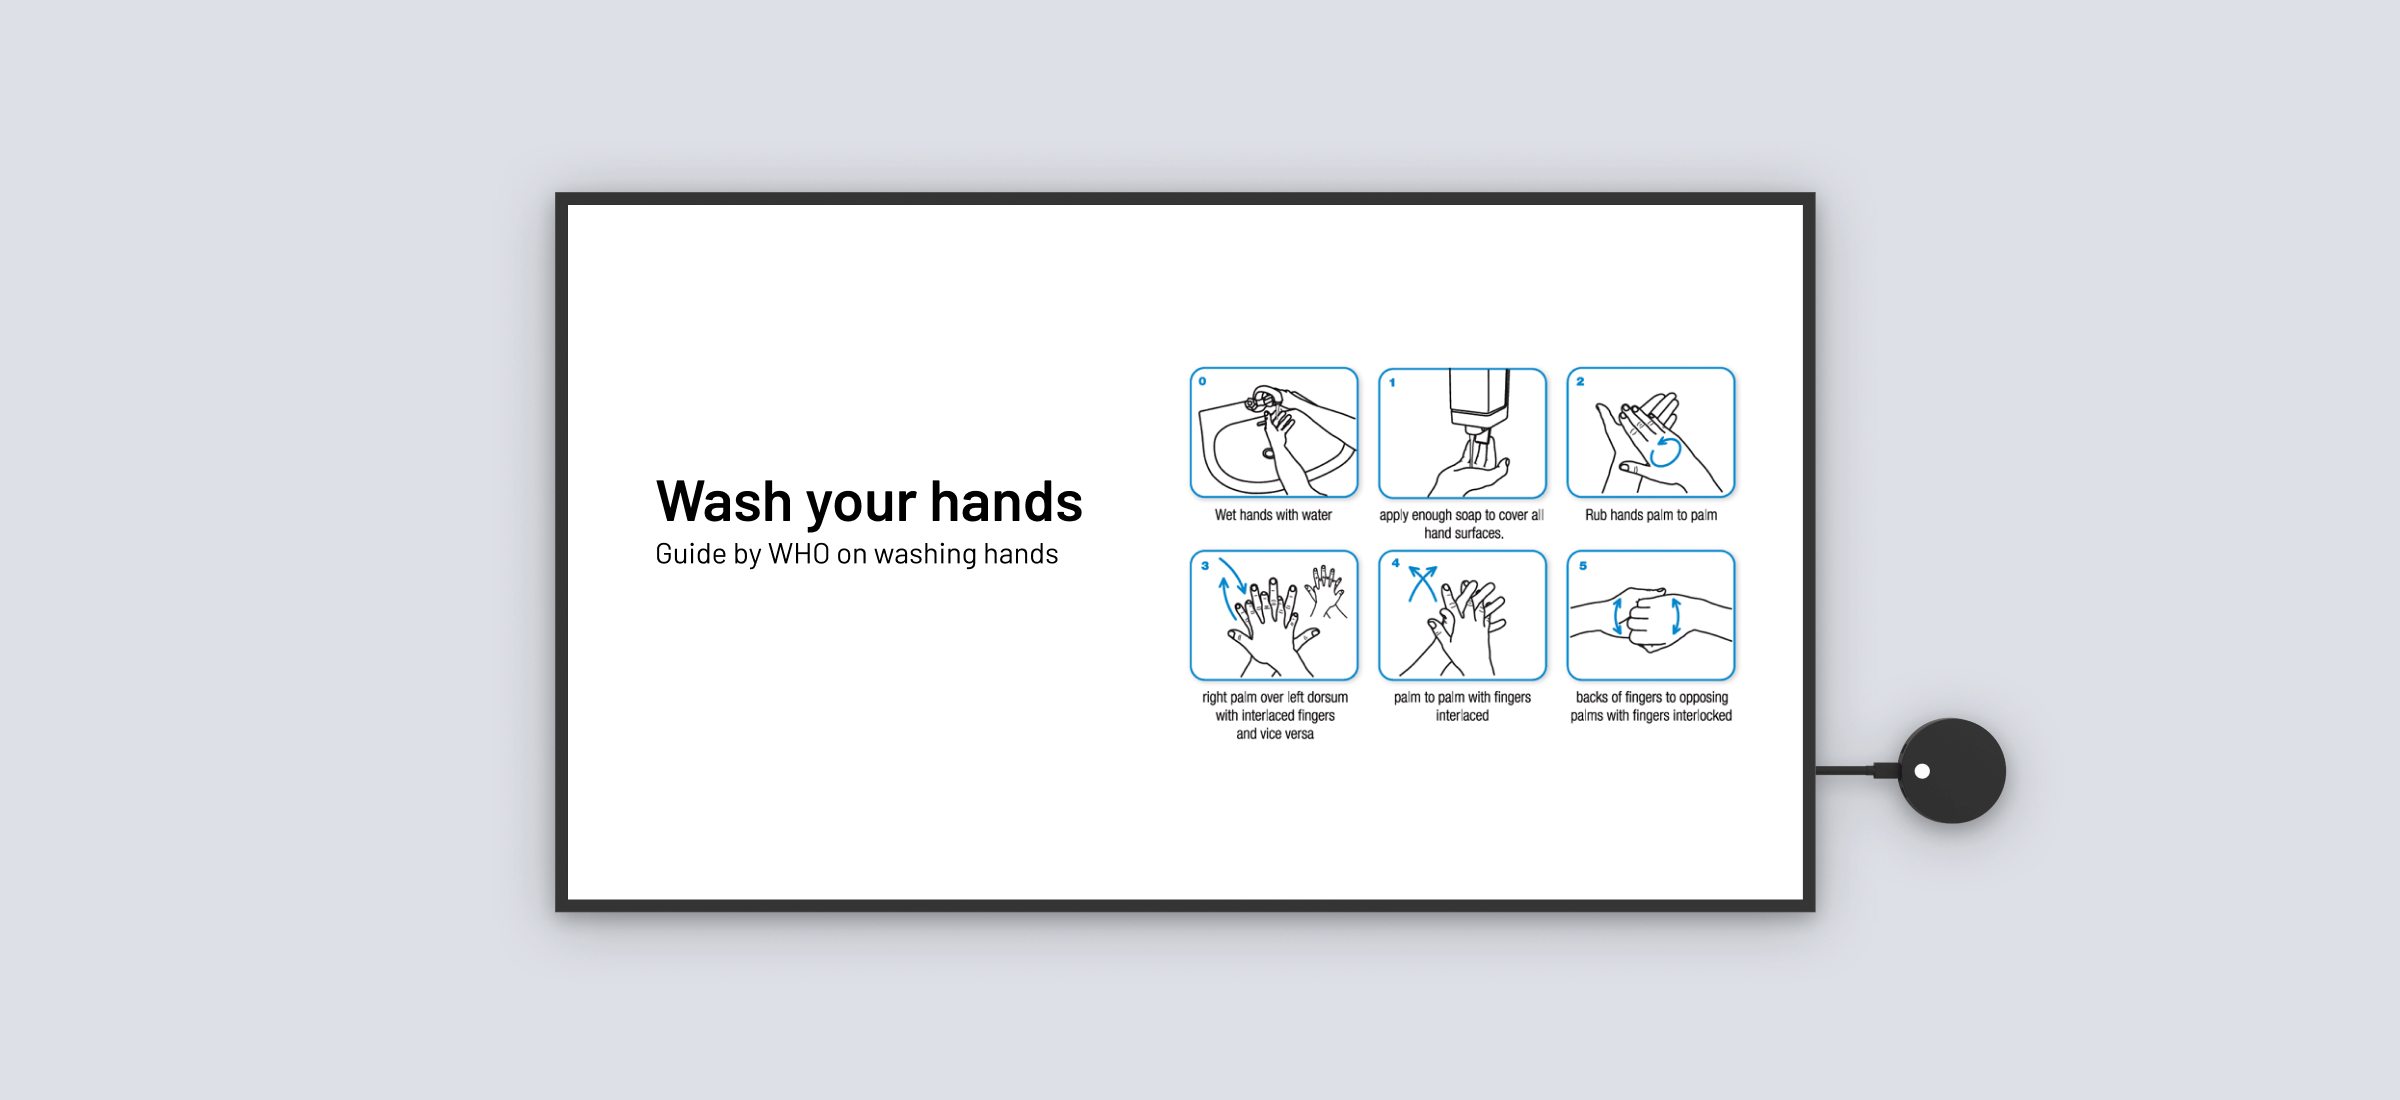 Wash your hands 2